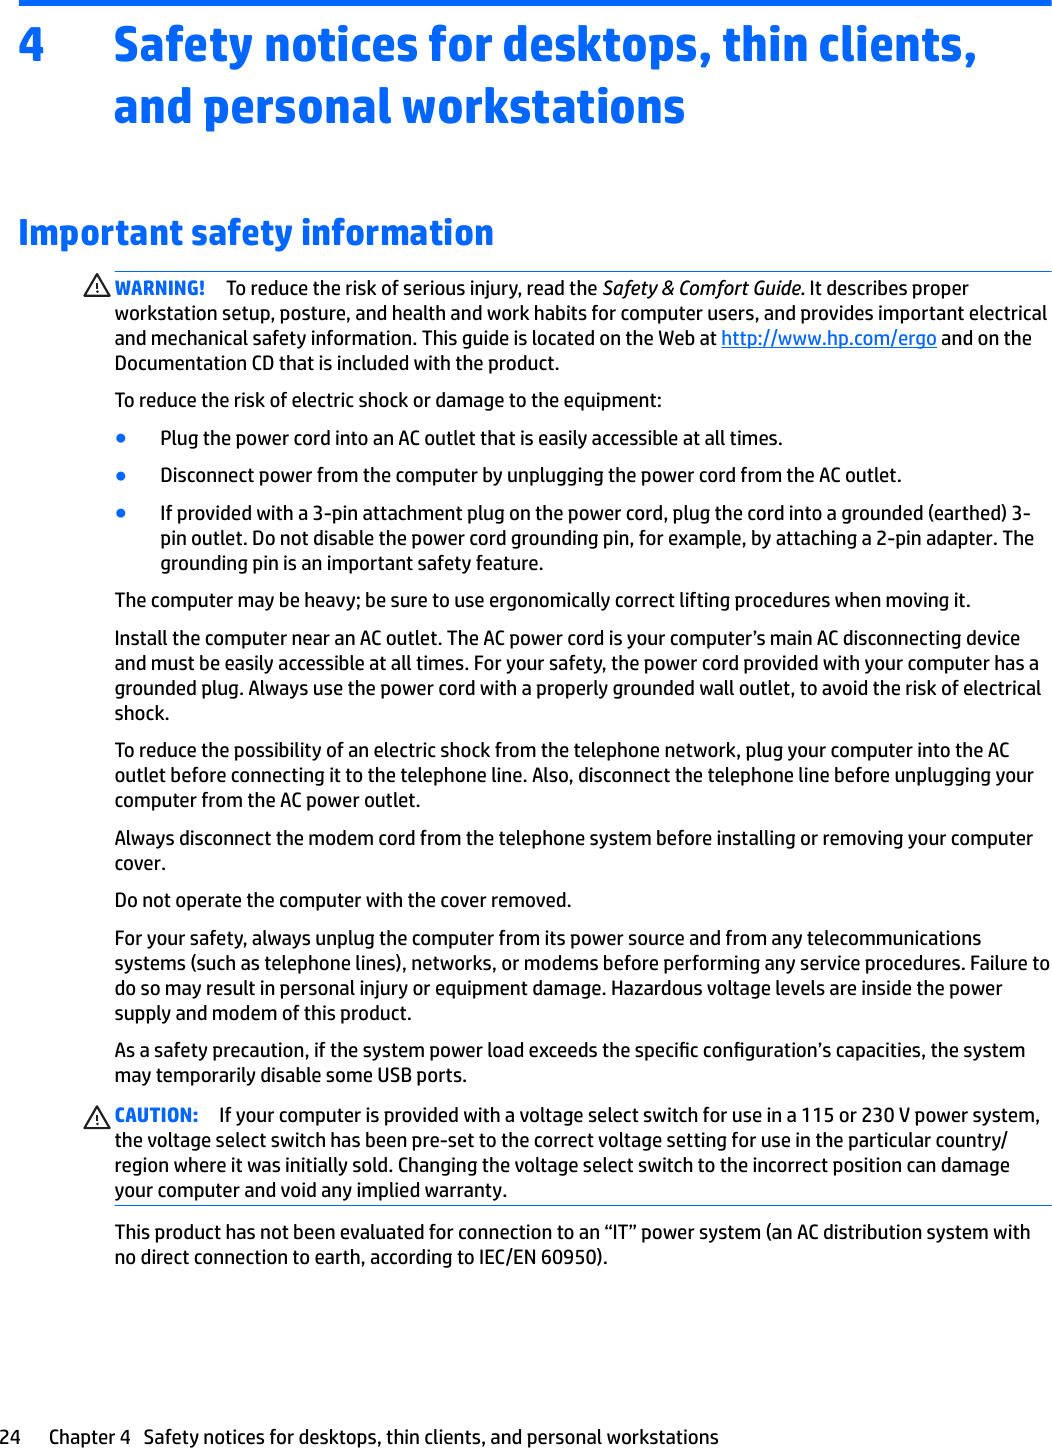 4 Safety notices for desktops, thin clients, and personal workstationsImportant safety informationWARNING! To reduce the risk of serious injury, read the Safety &amp; Comfort Guide. It describes proper workstation setup, posture, and health and work habits for computer users, and provides important electrical and mechanical safety information. This guide is located on the Web at http://www.hp.com/ergo and on the Documentation CD that is included with the product.To reduce the risk of electric shock or damage to the equipment:●Plug the power cord into an AC outlet that is easily accessible at all times.●Disconnect power from the computer by unplugging the power cord from the AC outlet.●If provided with a 3-pin attachment plug on the power cord, plug the cord into a grounded (earthed) 3-pin outlet. Do not disable the power cord grounding pin, for example, by attaching a 2-pin adapter. The grounding pin is an important safety feature.The computer may be heavy; be sure to use ergonomically correct lifting procedures when moving it.Install the computer near an AC outlet. The AC power cord is your computer’s main AC disconnecting device and must be easily accessible at all times. For your safety, the power cord provided with your computer has a grounded plug. Always use the power cord with a properly grounded wall outlet, to avoid the risk of electrical shock.To reduce the possibility of an electric shock from the telephone network, plug your computer into the AC outlet before connecting it to the telephone line. Also, disconnect the telephone line before unplugging your computer from the AC power outlet.Always disconnect the modem cord from the telephone system before installing or removing your computer cover.Do not operate the computer with the cover removed.For your safety, always unplug the computer from its power source and from any telecommunications systems (such as telephone lines), networks, or modems before performing any service procedures. Failure to do so may result in personal injury or equipment damage. Hazardous voltage levels are inside the power supply and modem of this product.As a safety precaution, if the system power load exceeds the specic conguration’s capacities, the system may temporarily disable some USB ports.CAUTION: If your computer is provided with a voltage select switch for use in a 115 or 230 V power system, the voltage select switch has been pre-set to the correct voltage setting for use in the particular country/region where it was initially sold. Changing the voltage select switch to the incorrect position can damage your computer and void any implied warranty.This product has not been evaluated for connection to an “IT” power system (an AC distribution system with no direct connection to earth, according to IEC/EN 60950).24 Chapter 4   Safety notices for desktops, thin clients, and personal workstations